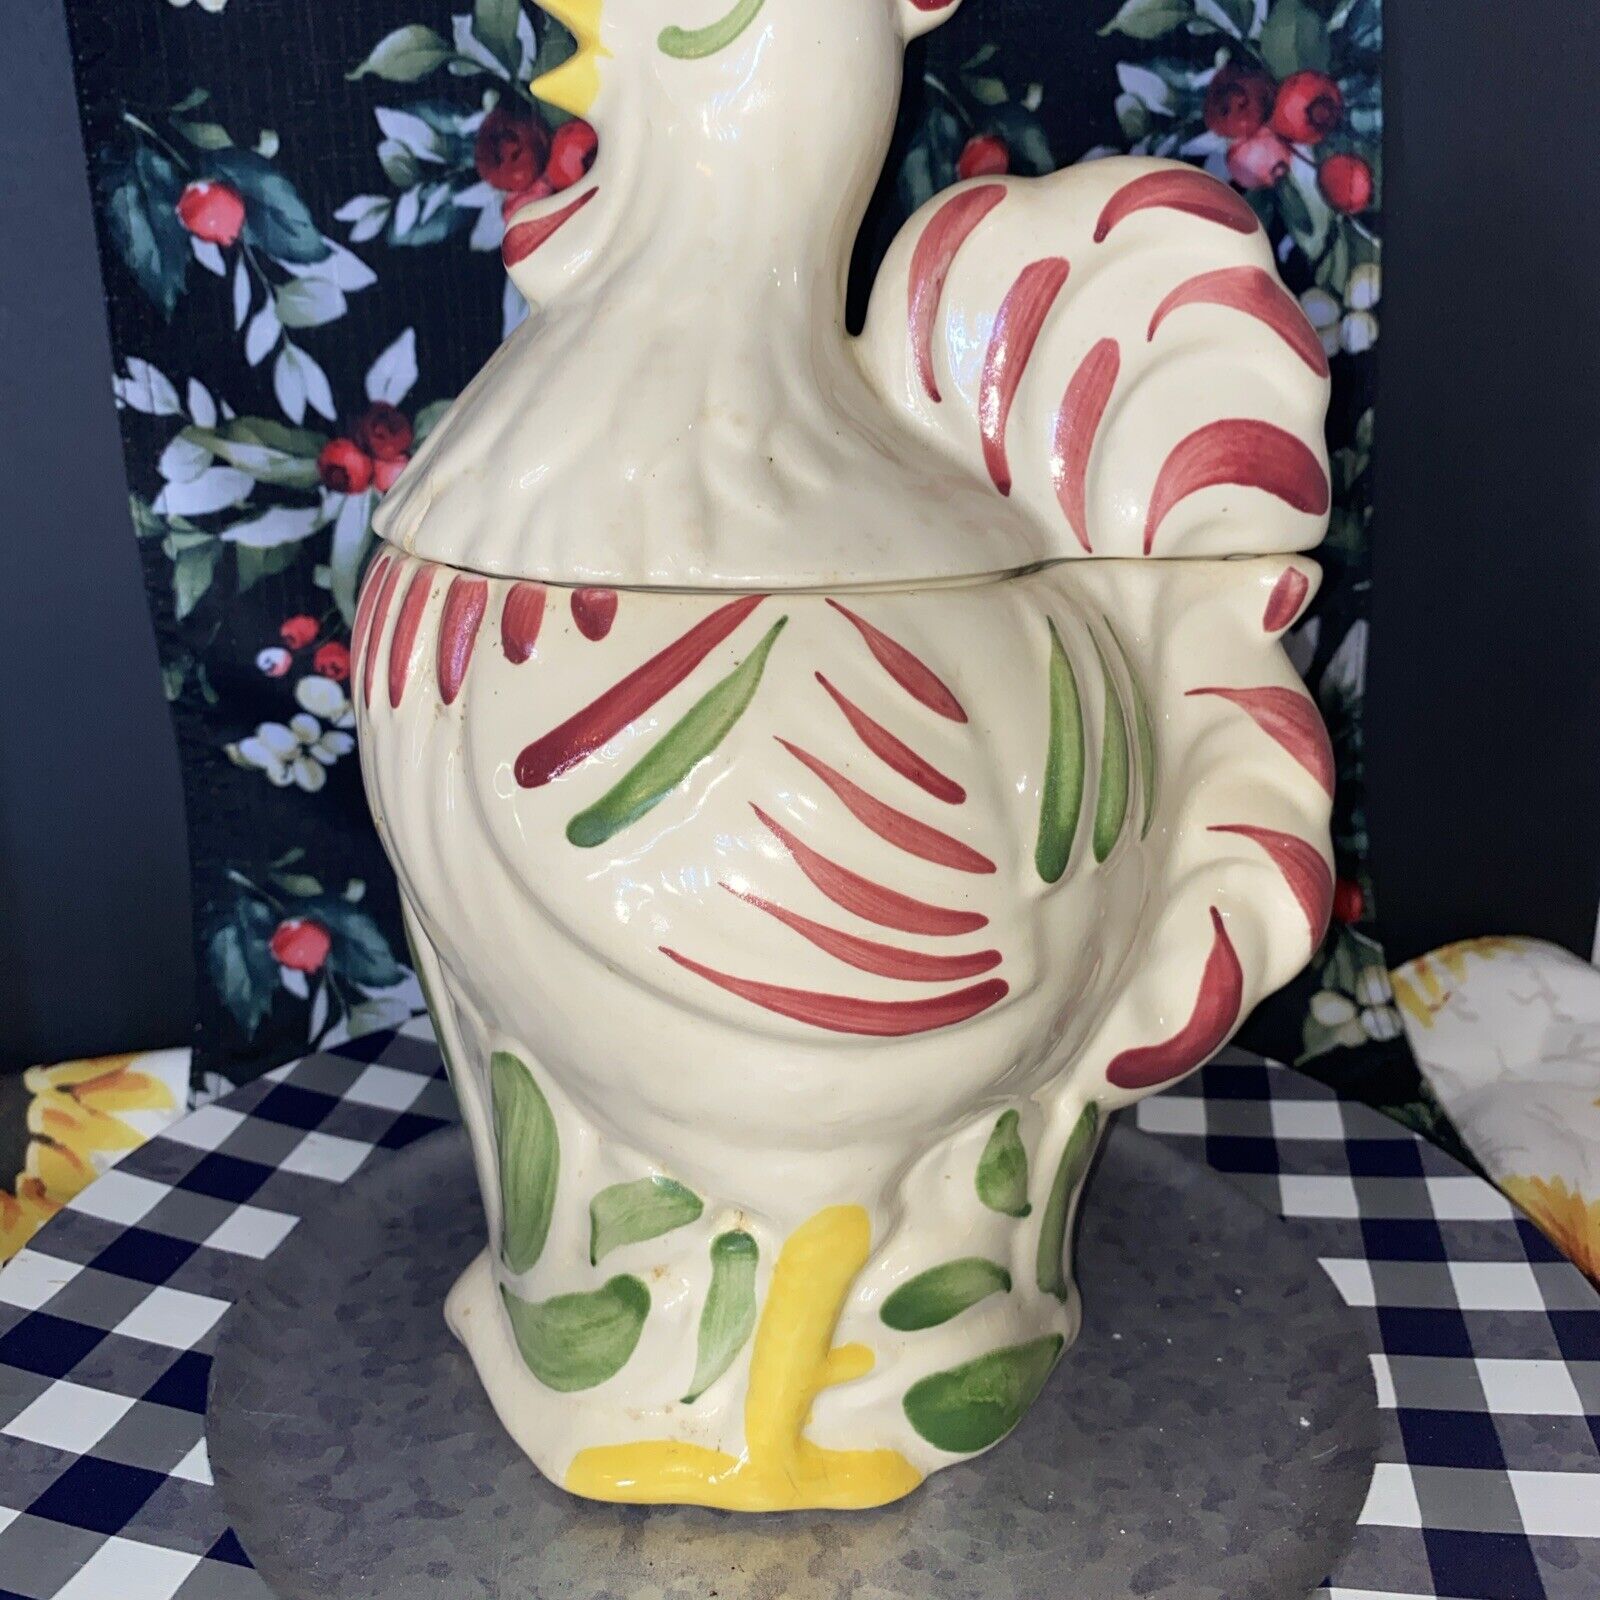 Vintage Purinton Slip 1950's Rooster/Chicken Cookie Jar Rare Has A Crack /chips